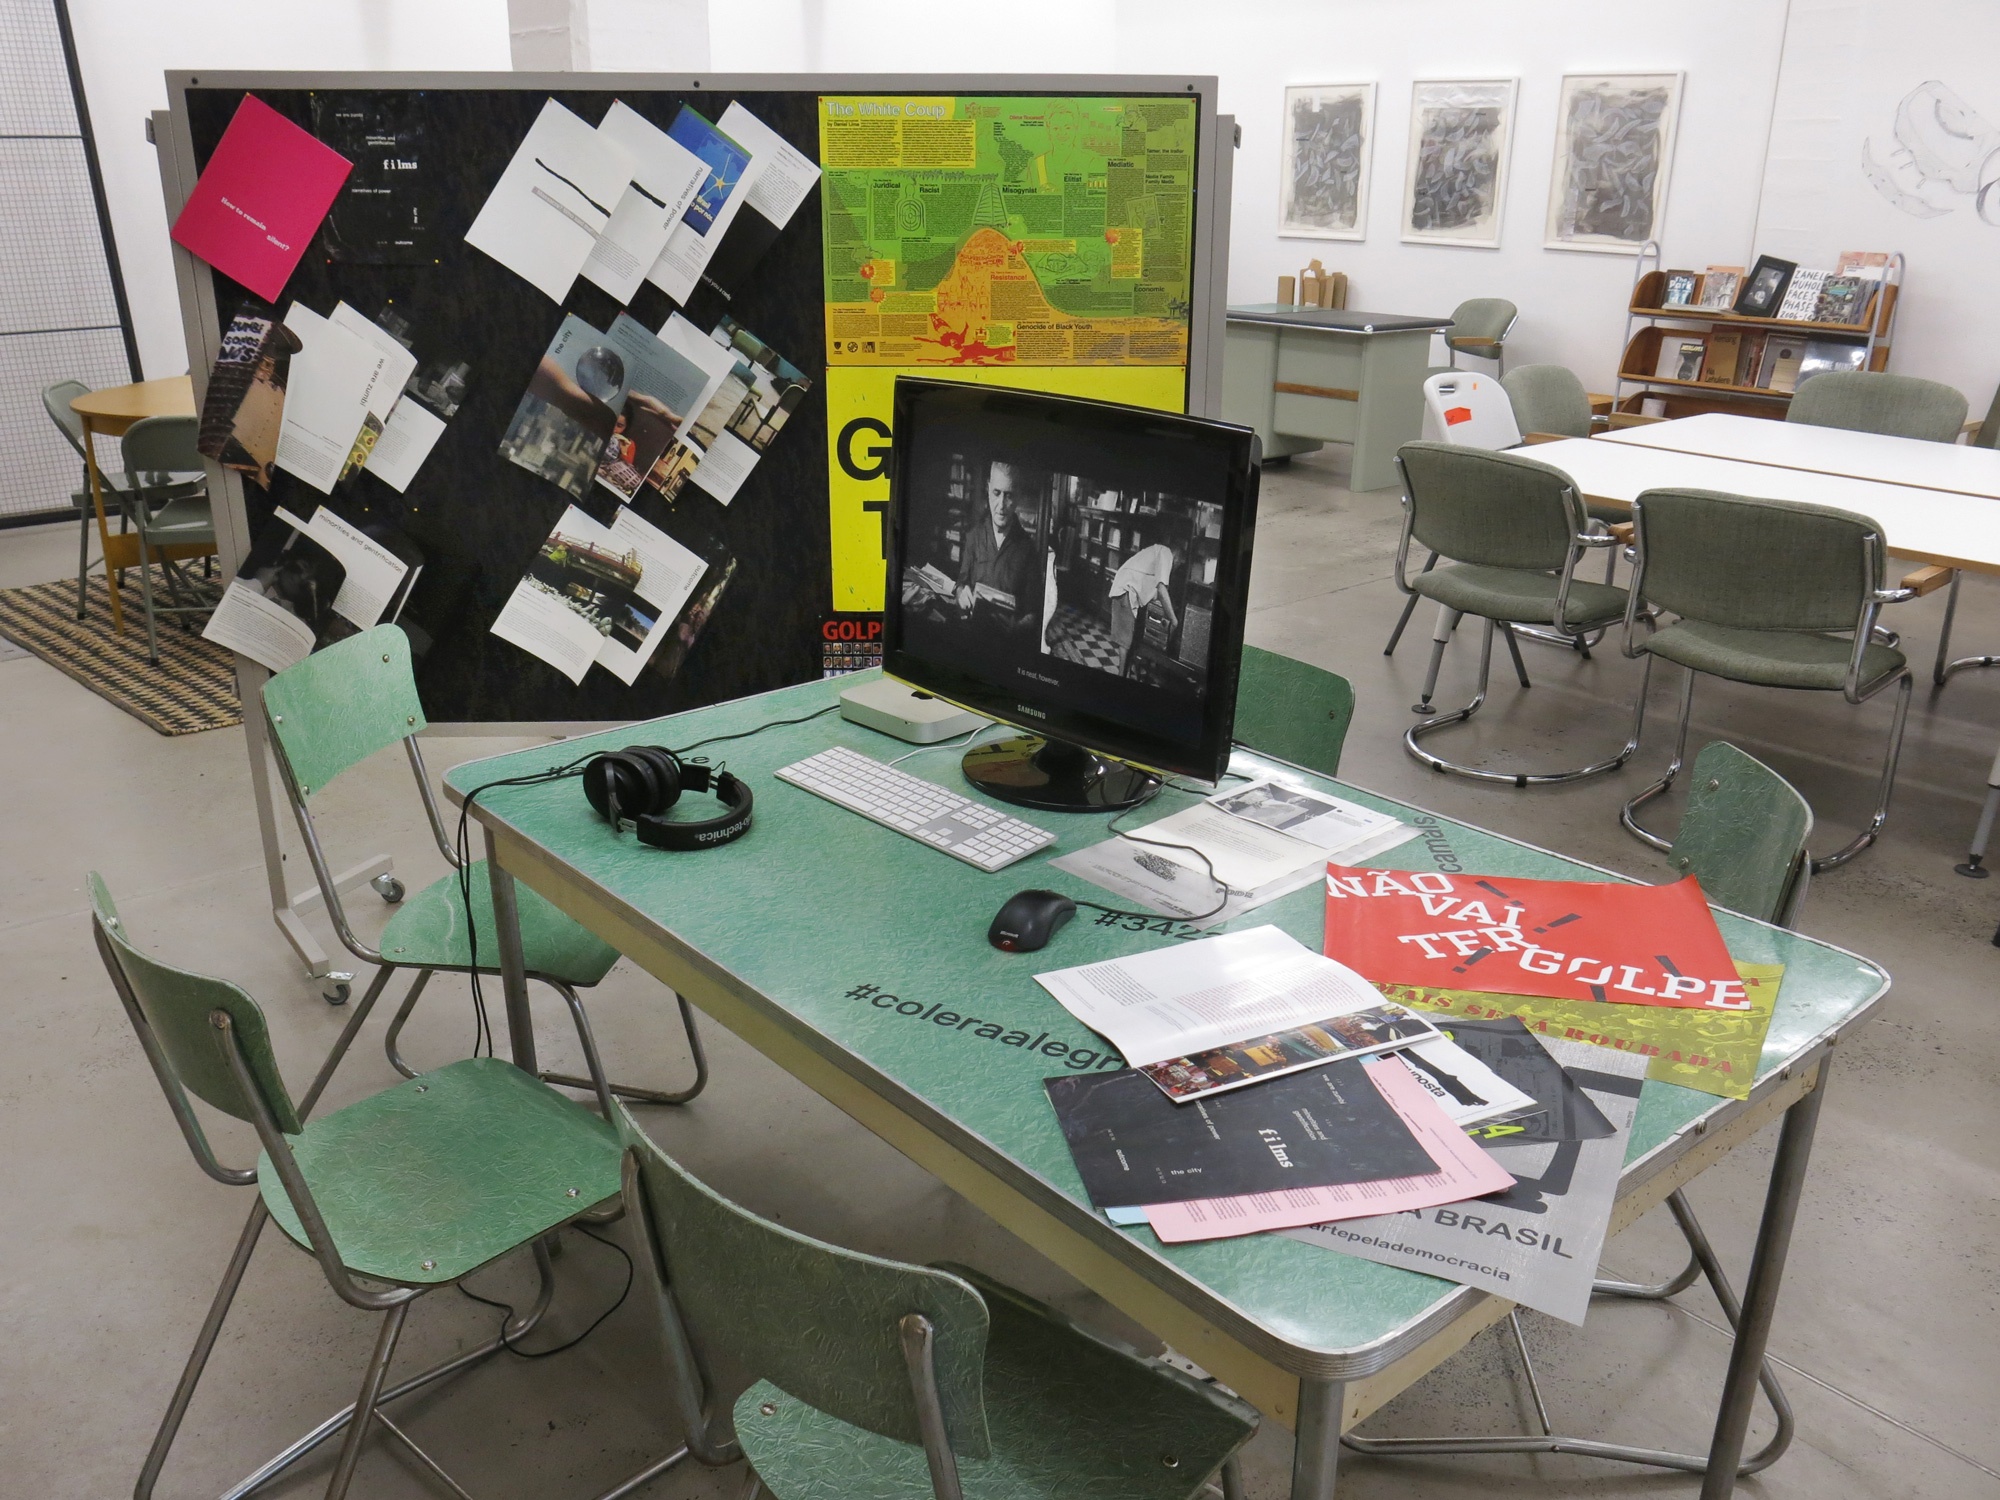 Installation photograph from the ‘How to Remain Silent’ exhibition on A4’s ground floor. A computer with earphones sits on a table screening Jonathas de Andrade’s video work ‘O Caseiro’ (‘The Housekeeper’), accompanied by printed matter on the table and on a pin board behind it.
